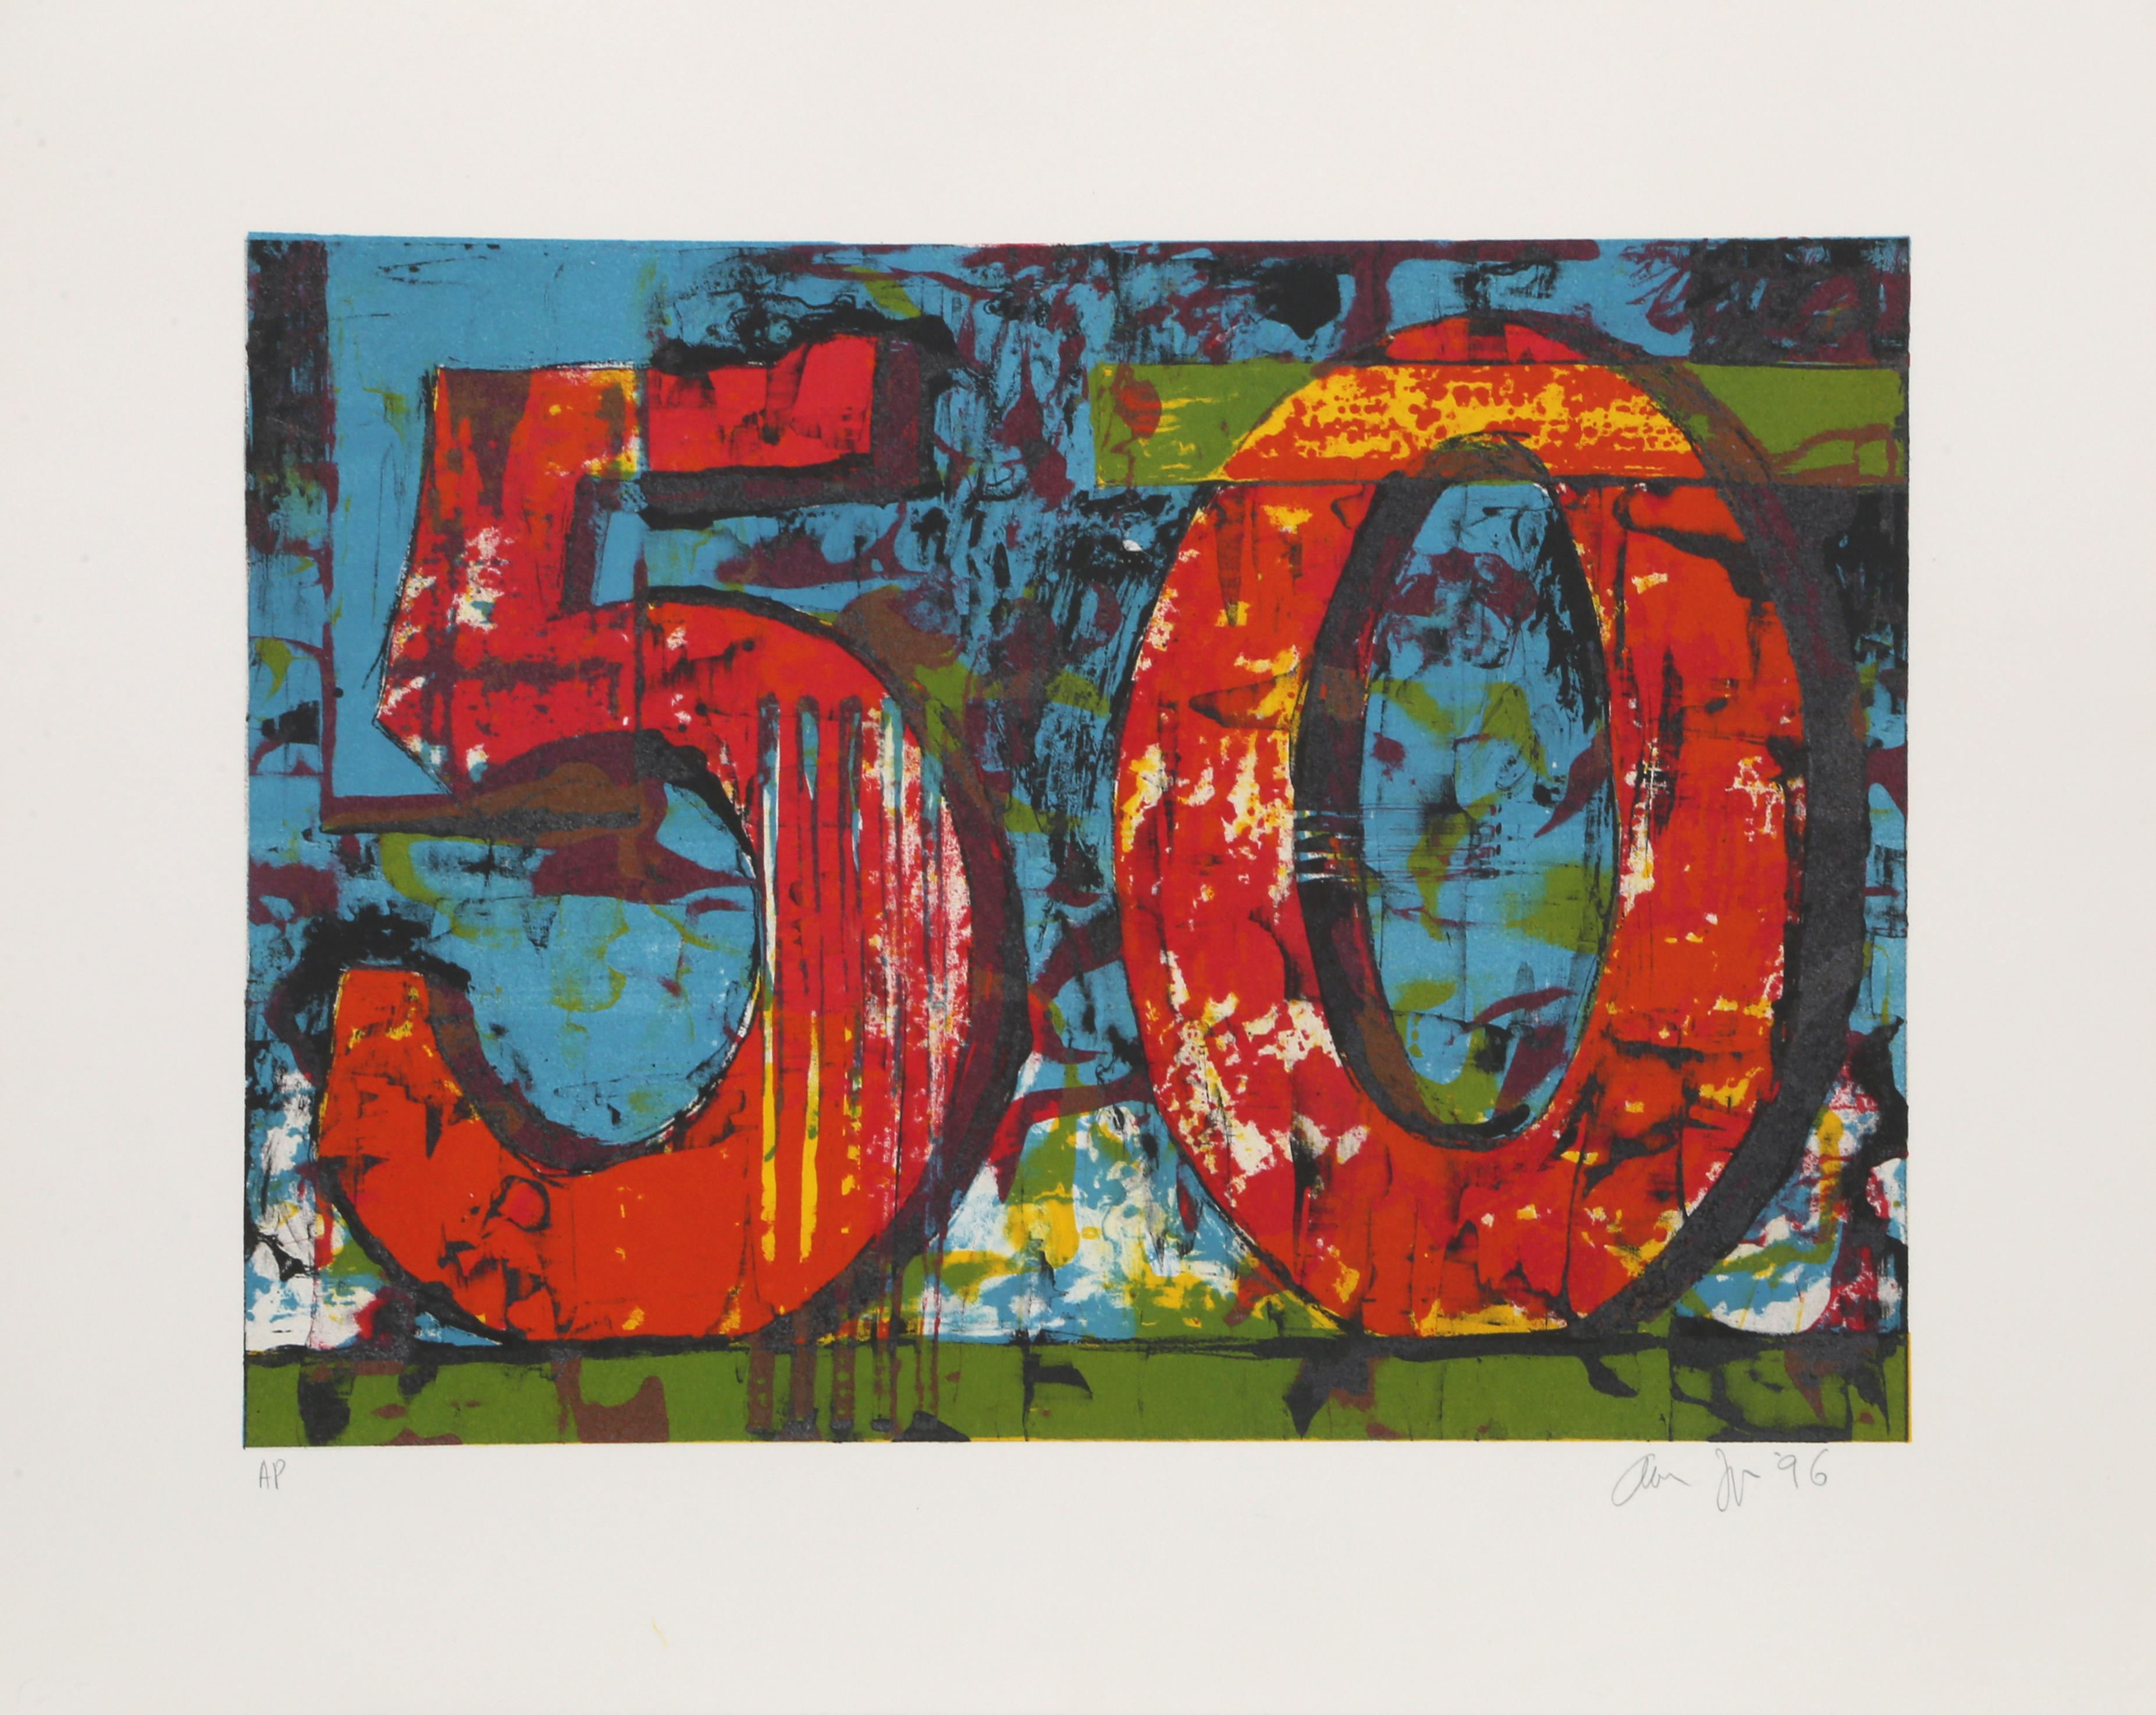 Artist: Aaron Fink, American (1955 - )
Title: 50
Year: 1996
Medium: Lithograph, signed in pencil
Edition: AP
Image Size: 14 x 20 inches
Size: 20 x 26 in. (50.8 x 66.04 cm)